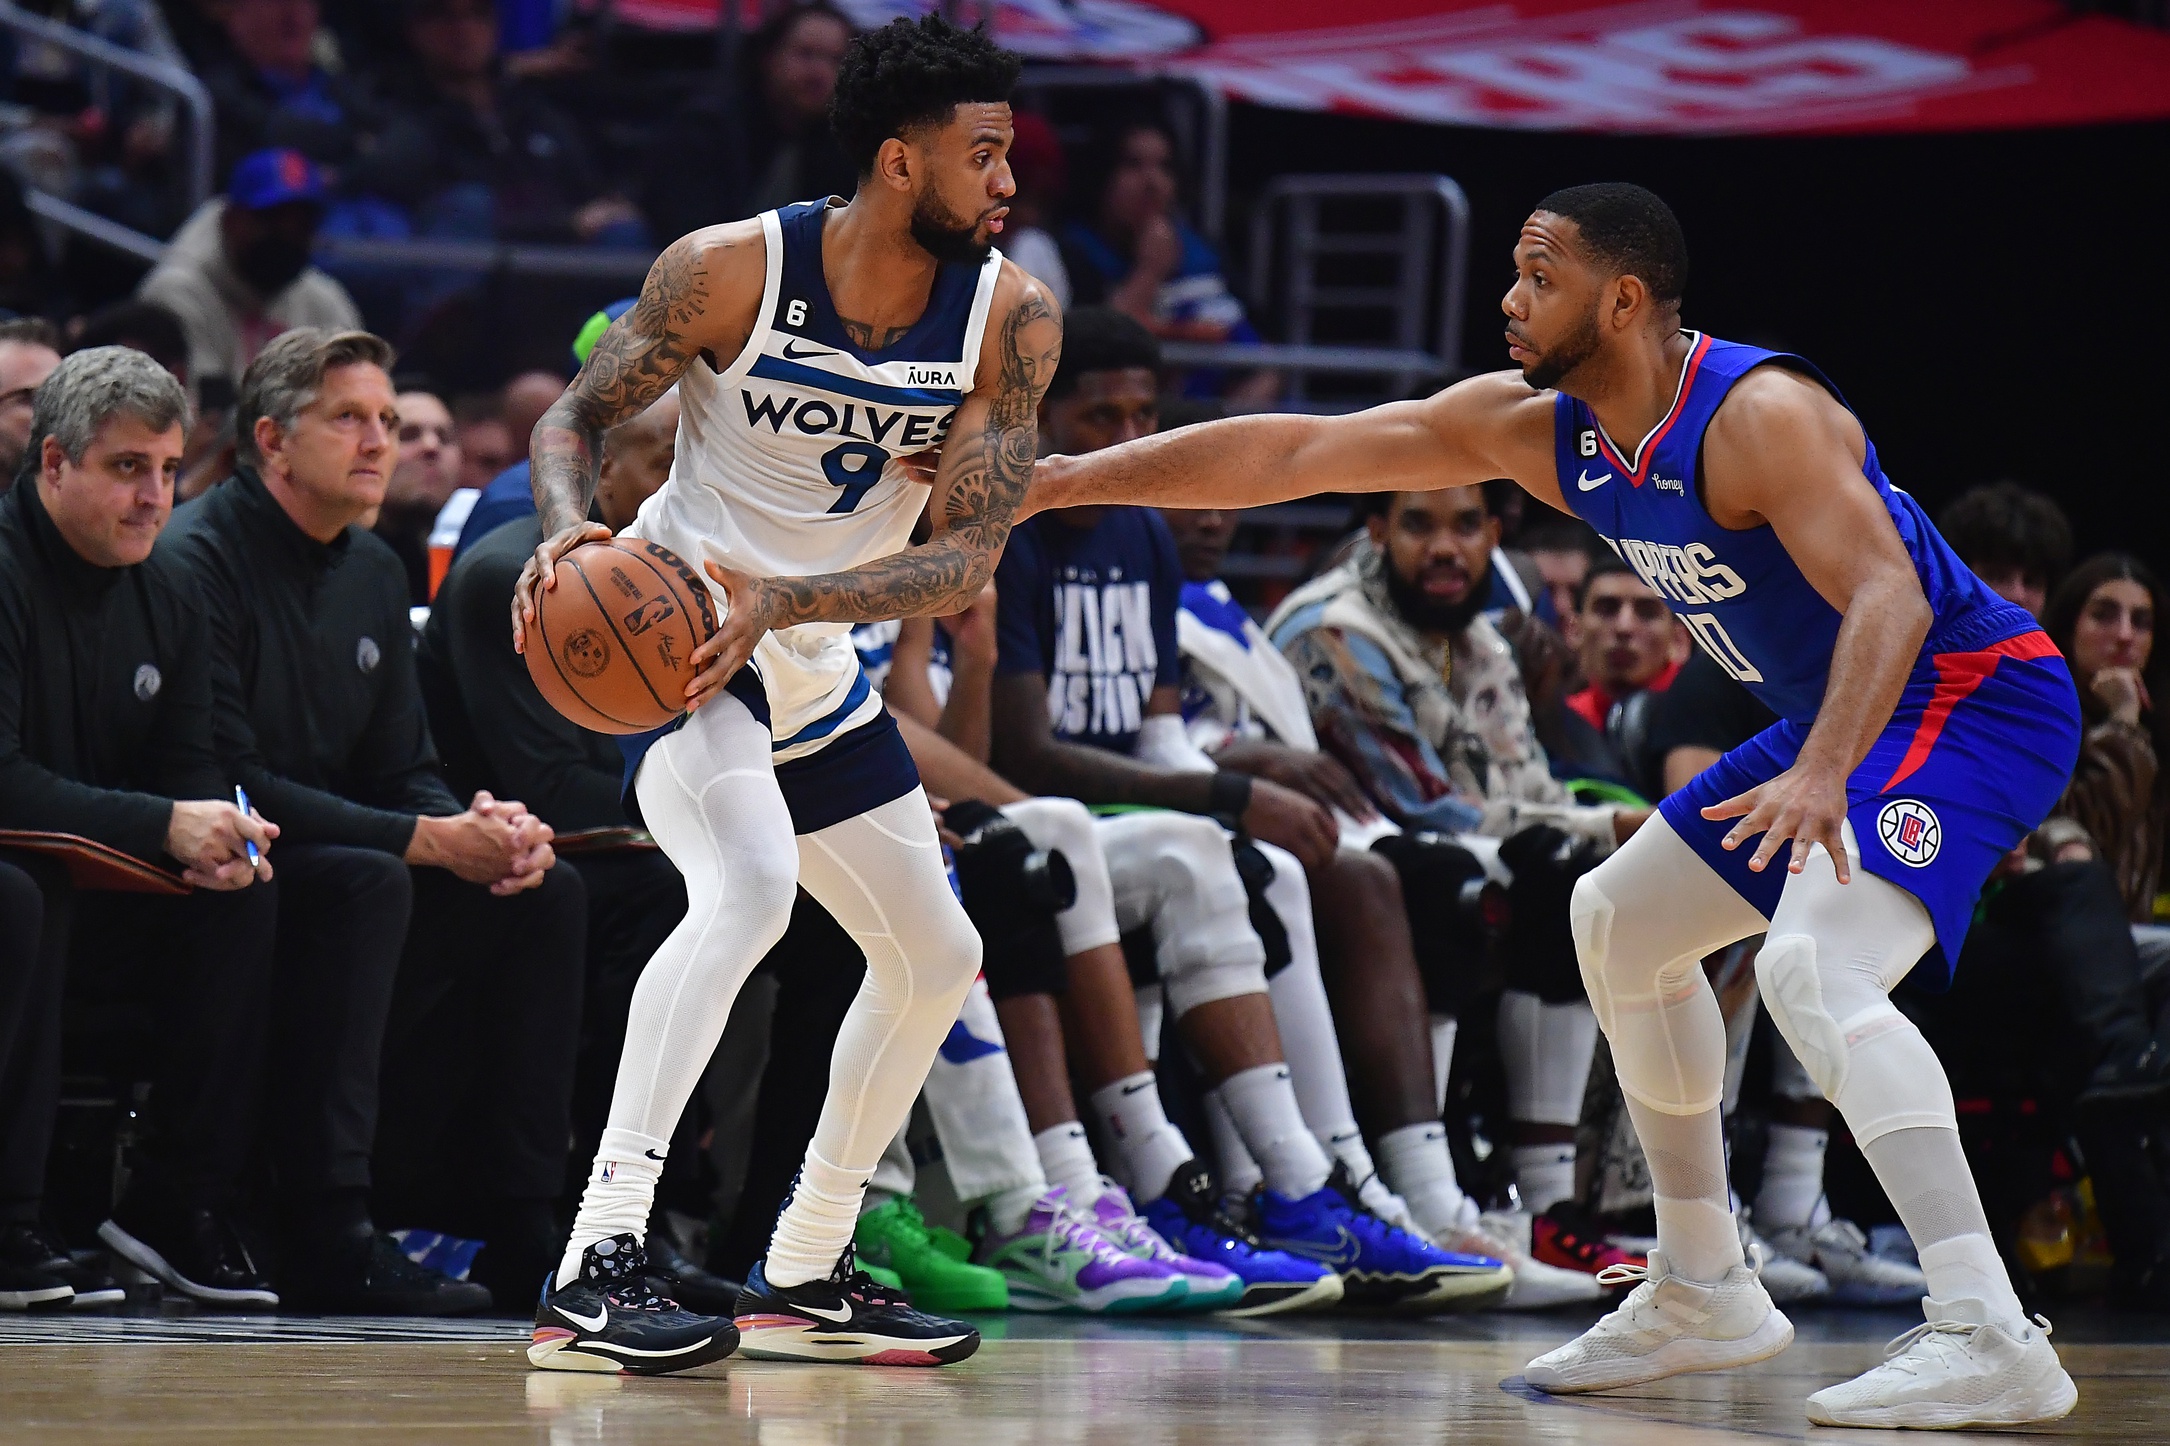 Feb 28, 2023; Los Angeles, California, USA; Minnesota Timberwolves guard Nickeil Alexander-Walker (9) controls the ball against Los Angeles Clippers guard Eric Gordon (10) during the first half at Crypto.com Arena. Mandatory Credit: Gary A. Vasquez-USA TODAY Sports